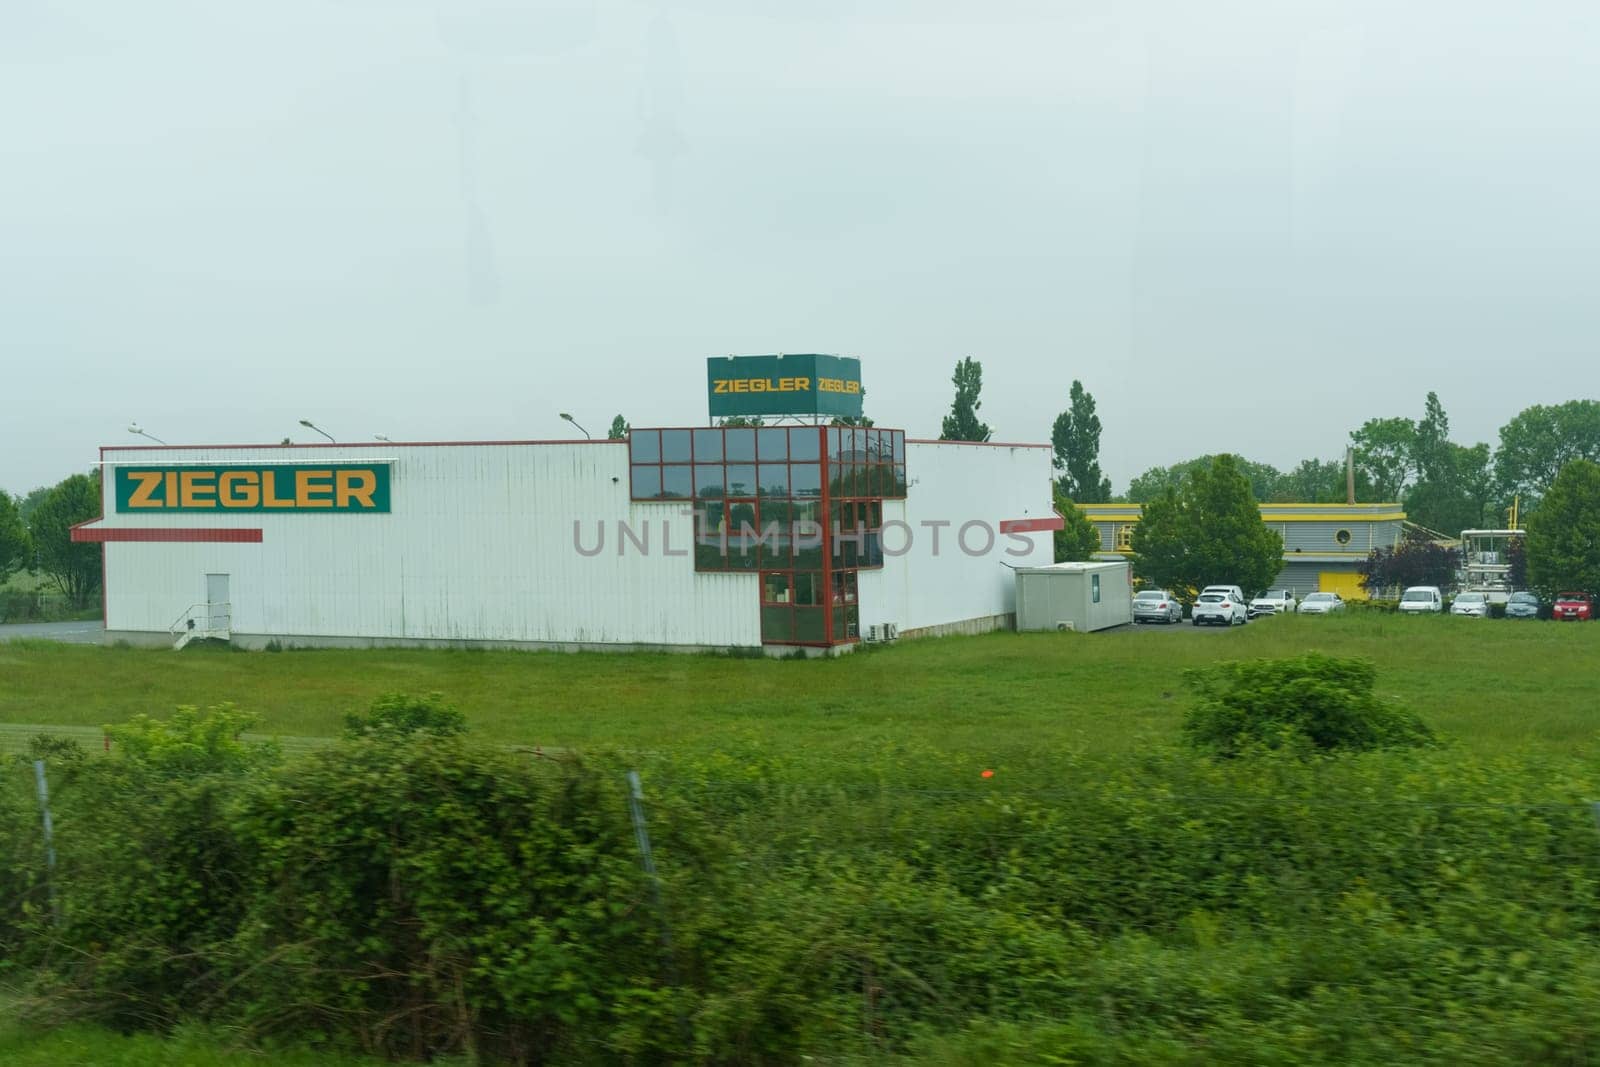 Orly, France - May 23, 2023: The Ziegler building stands beside a road, partly obscured by greenery, with the glimpse of a clear sky and other establishments in the distance.